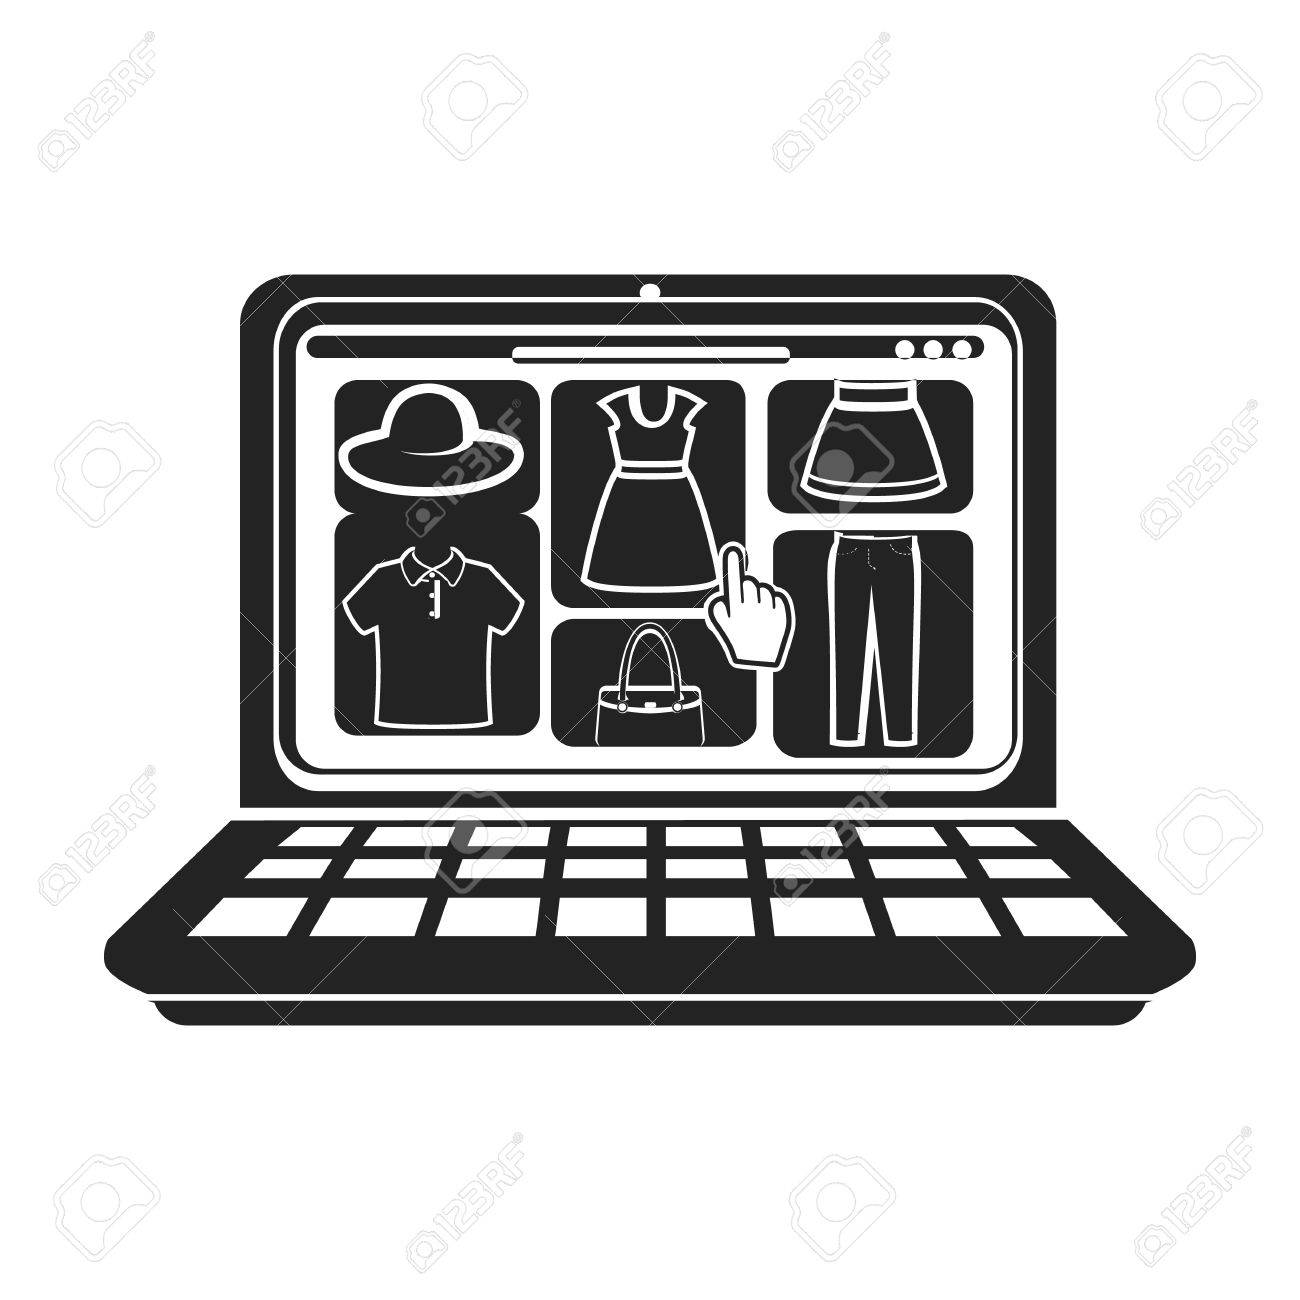 Online Shopping Svg Png Icon Free Download (#61426 